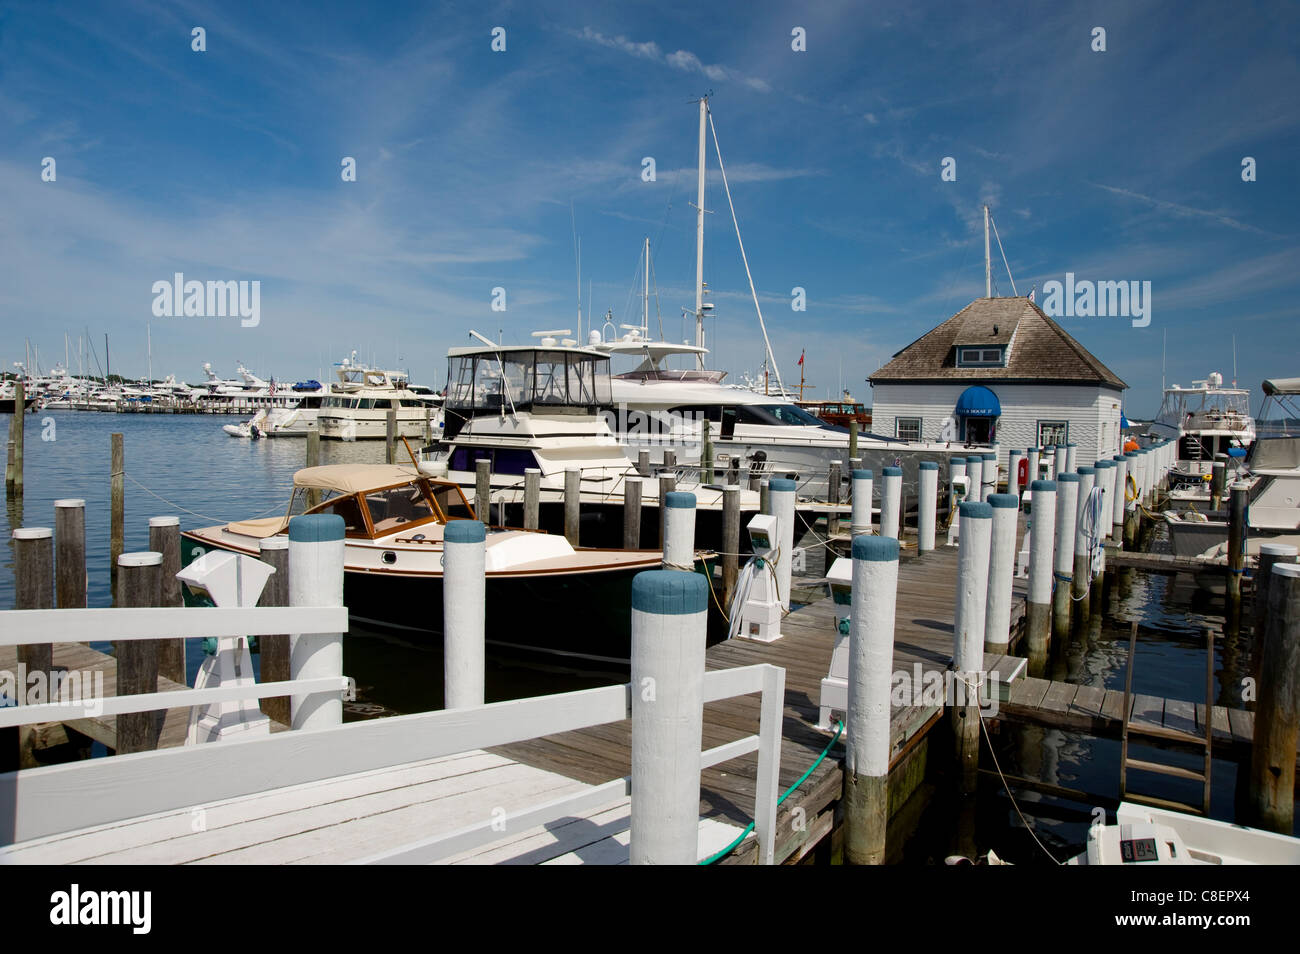 Boats around the yacht club in Sag Harbor, Long Island, New York State, United States of America Stock Photo